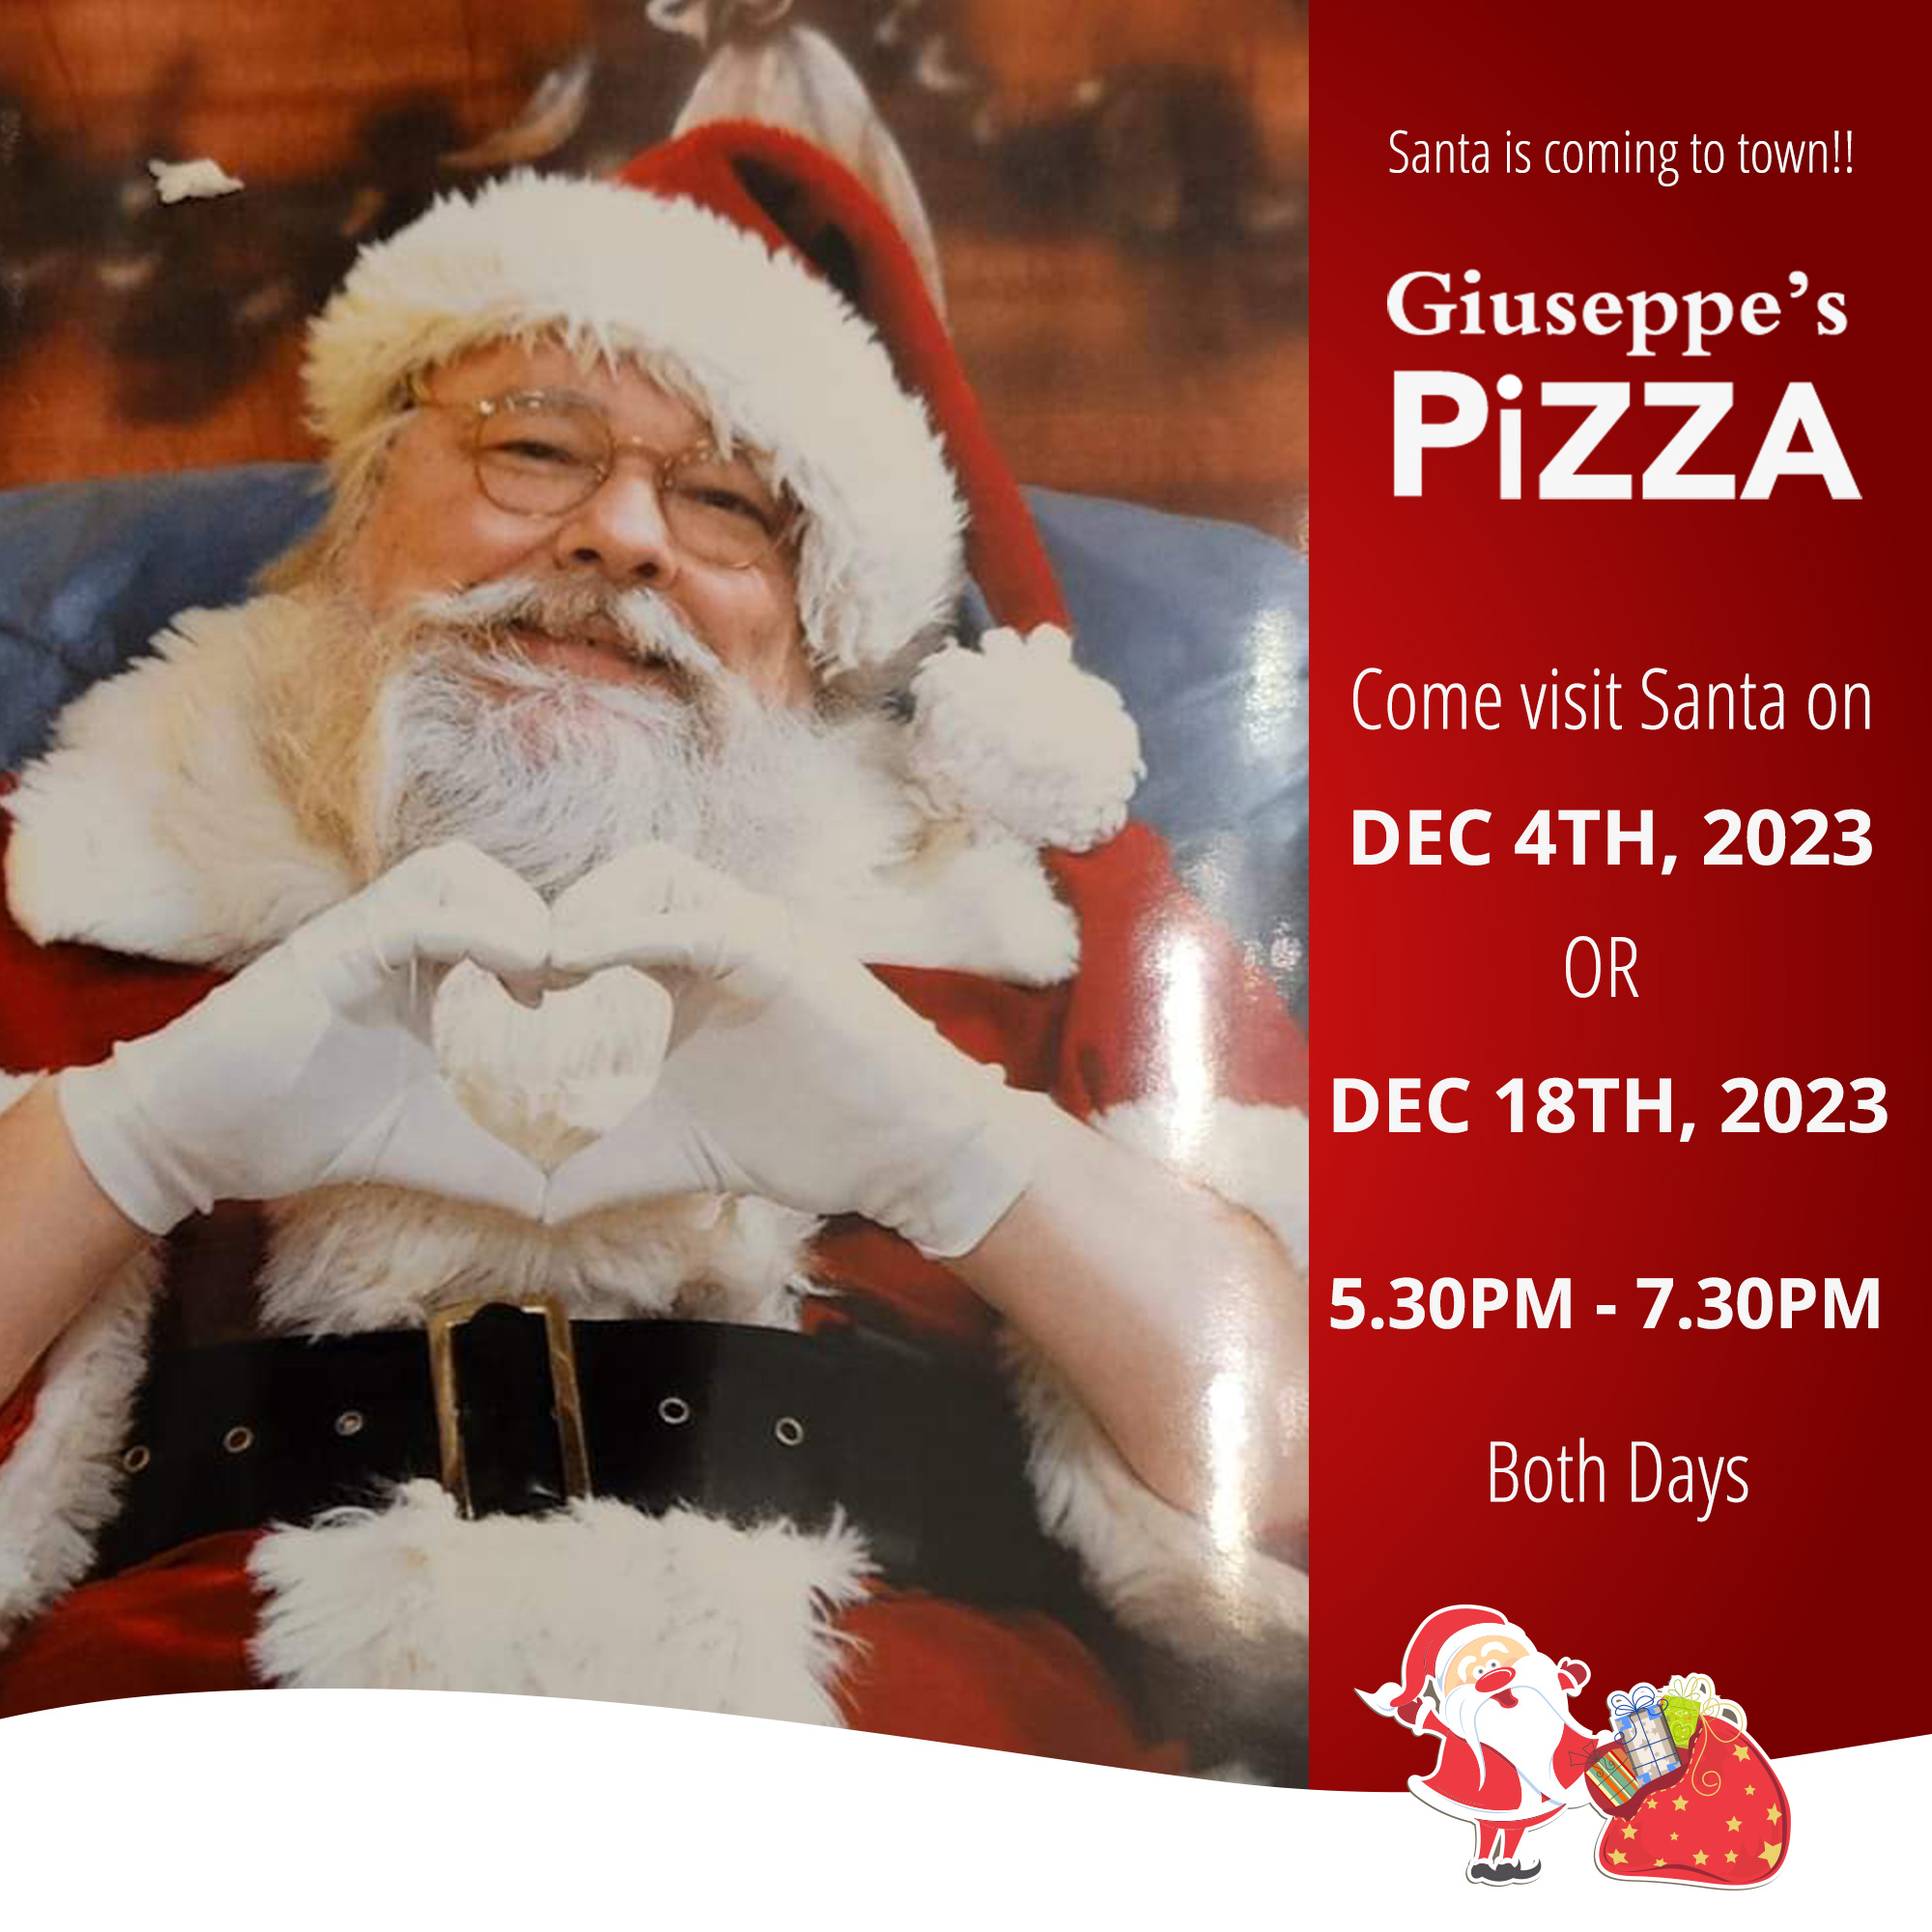 Santa is coming to Giuseppes this December, 2023